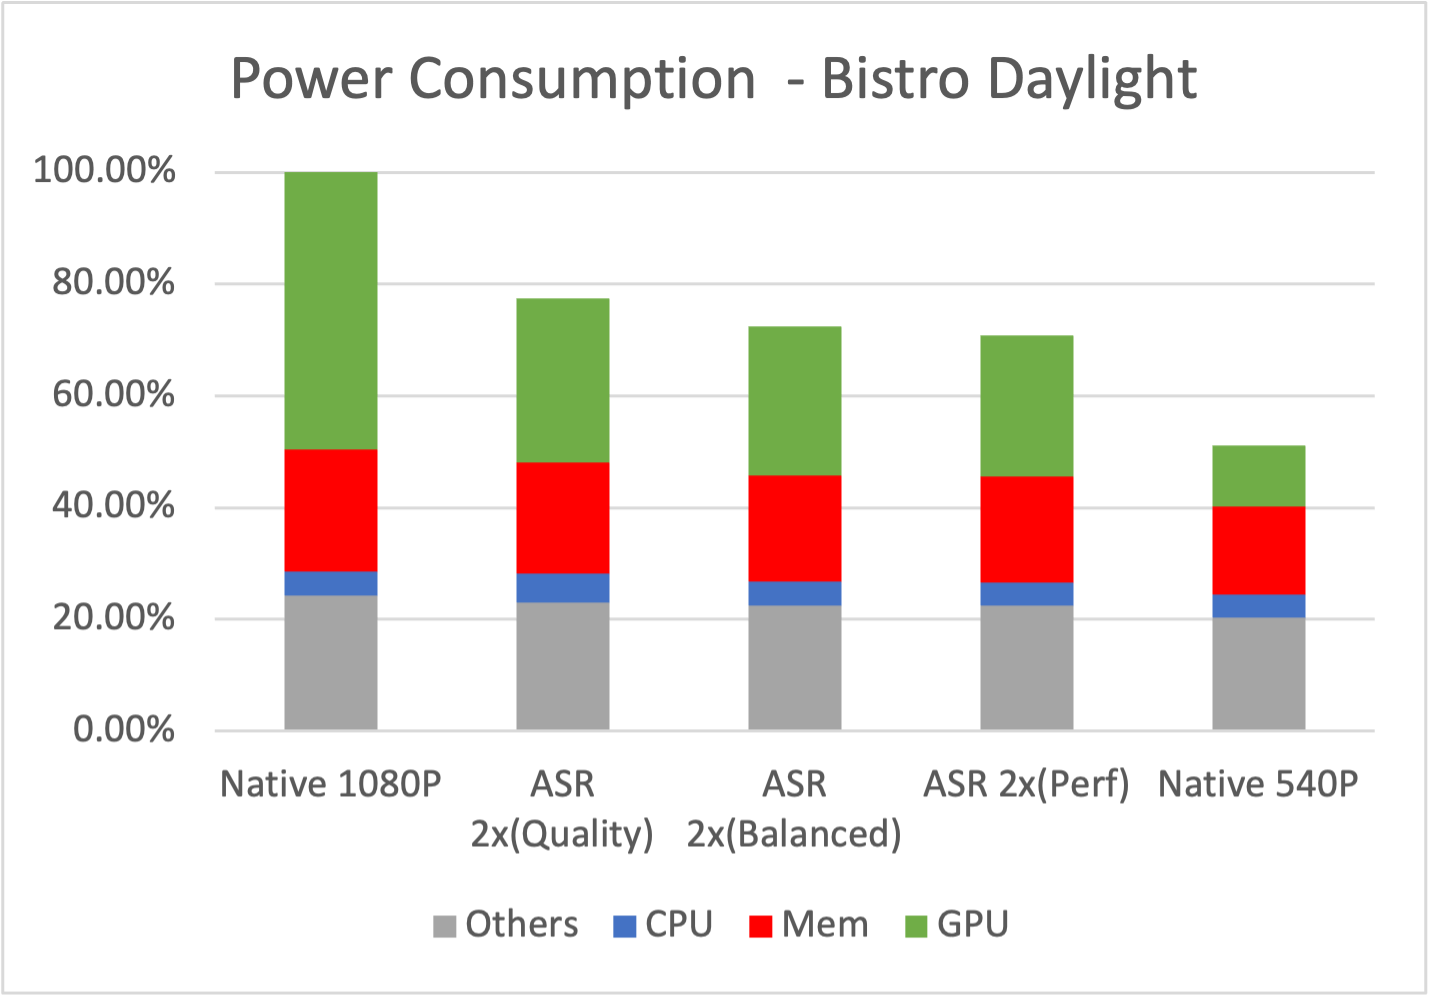 Power Consumption for native full resolution (1080p), Arm ASR quality, balanced and performance upscaling from 540p to 1080p, plus native half resolution (540p)